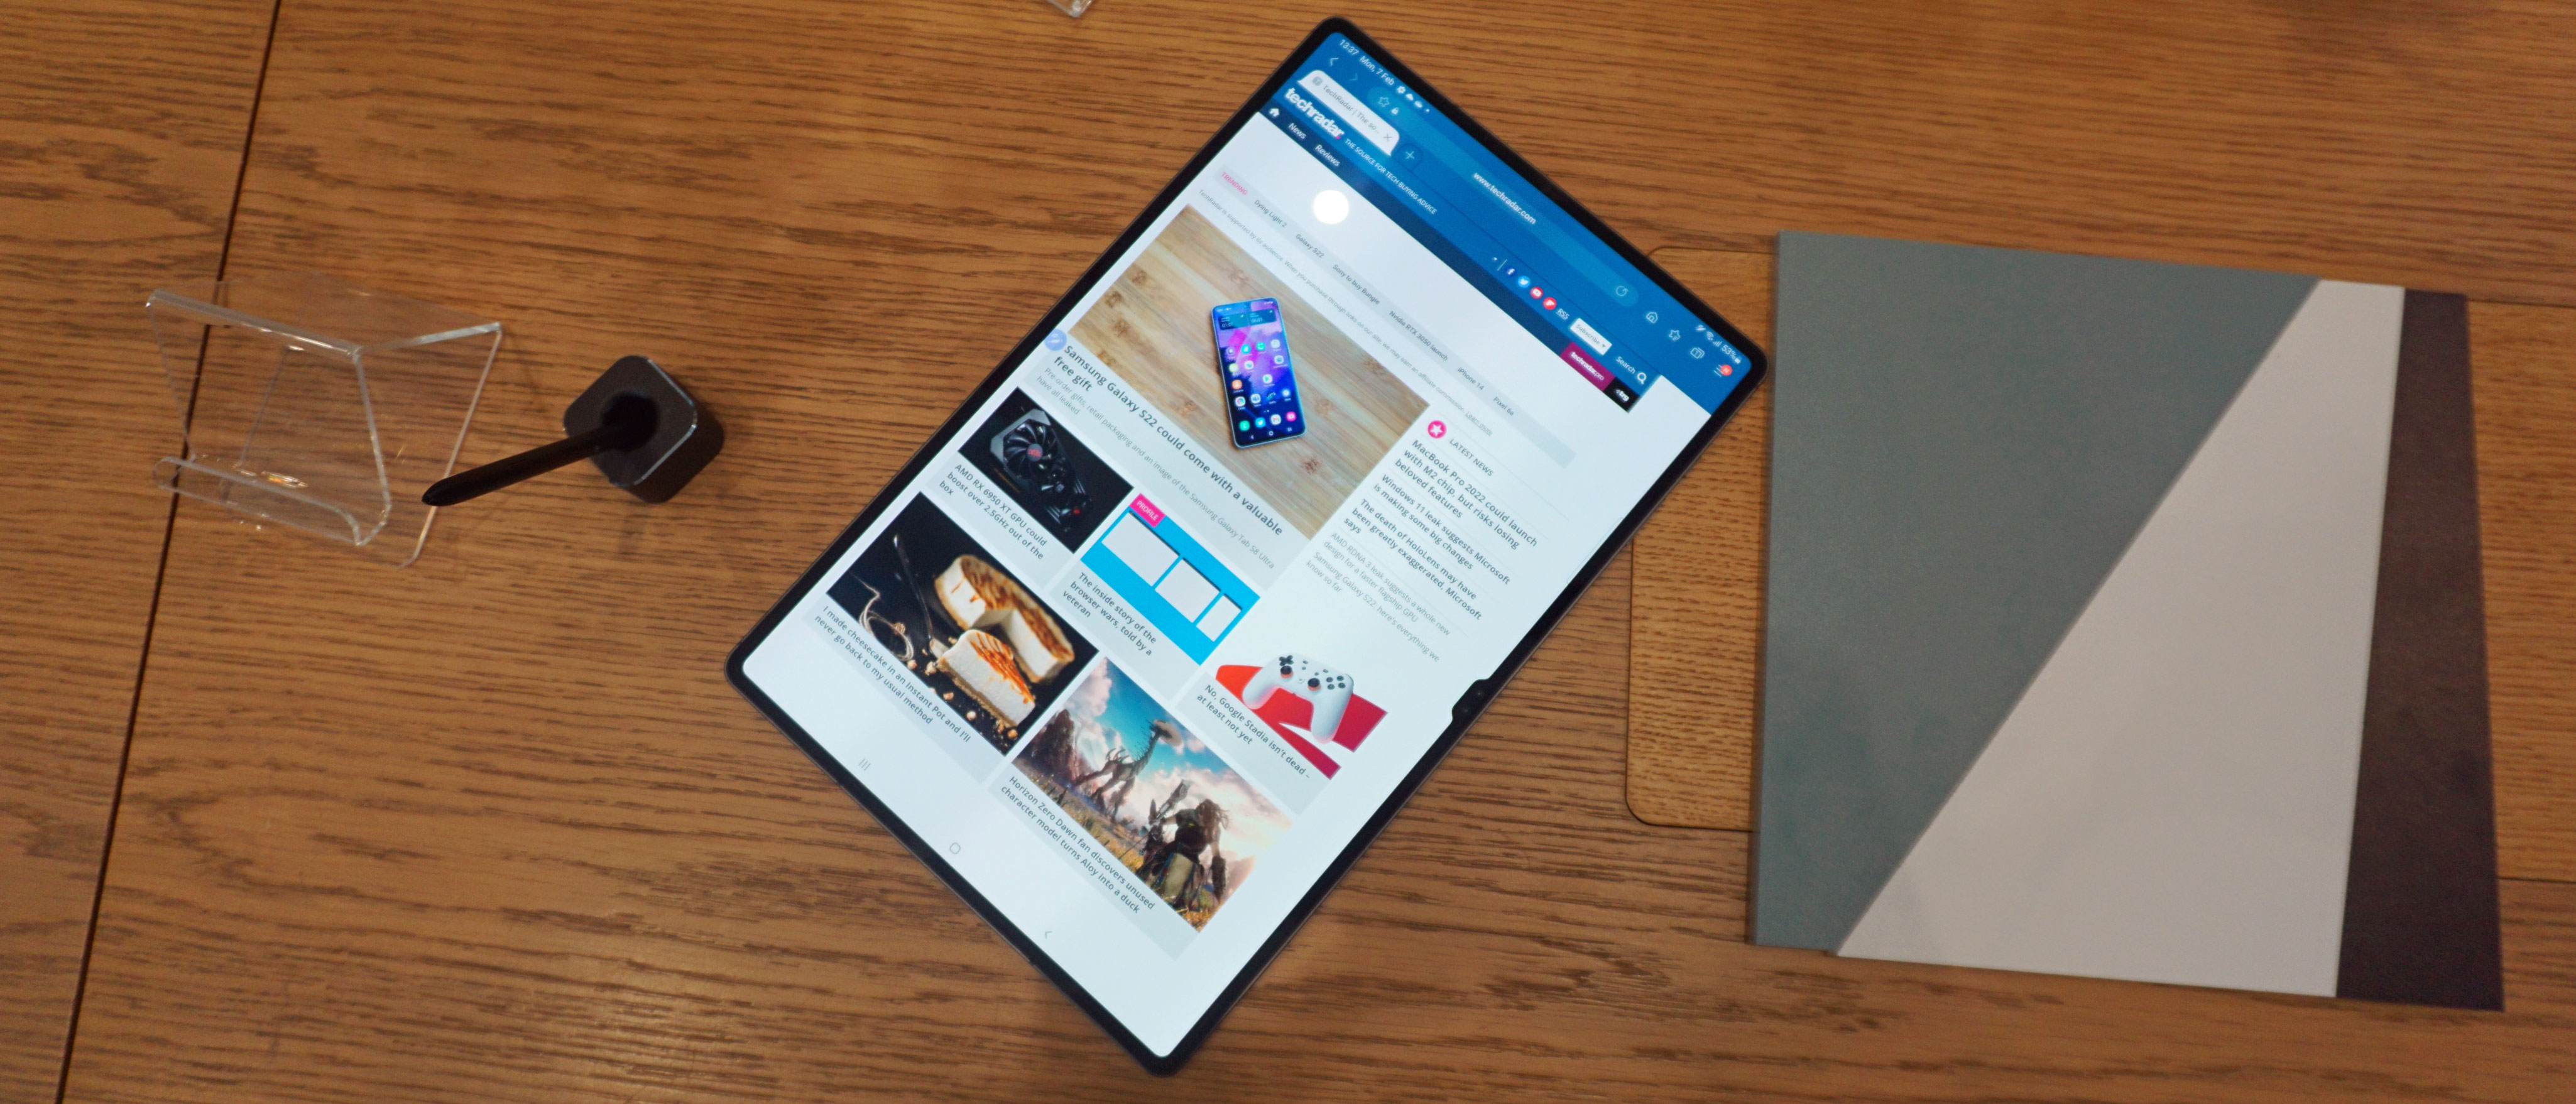 Samsung Galaxy Tab S8 Ultra A Gigantic Android Tablet That Ll Prove Divisive Techradar